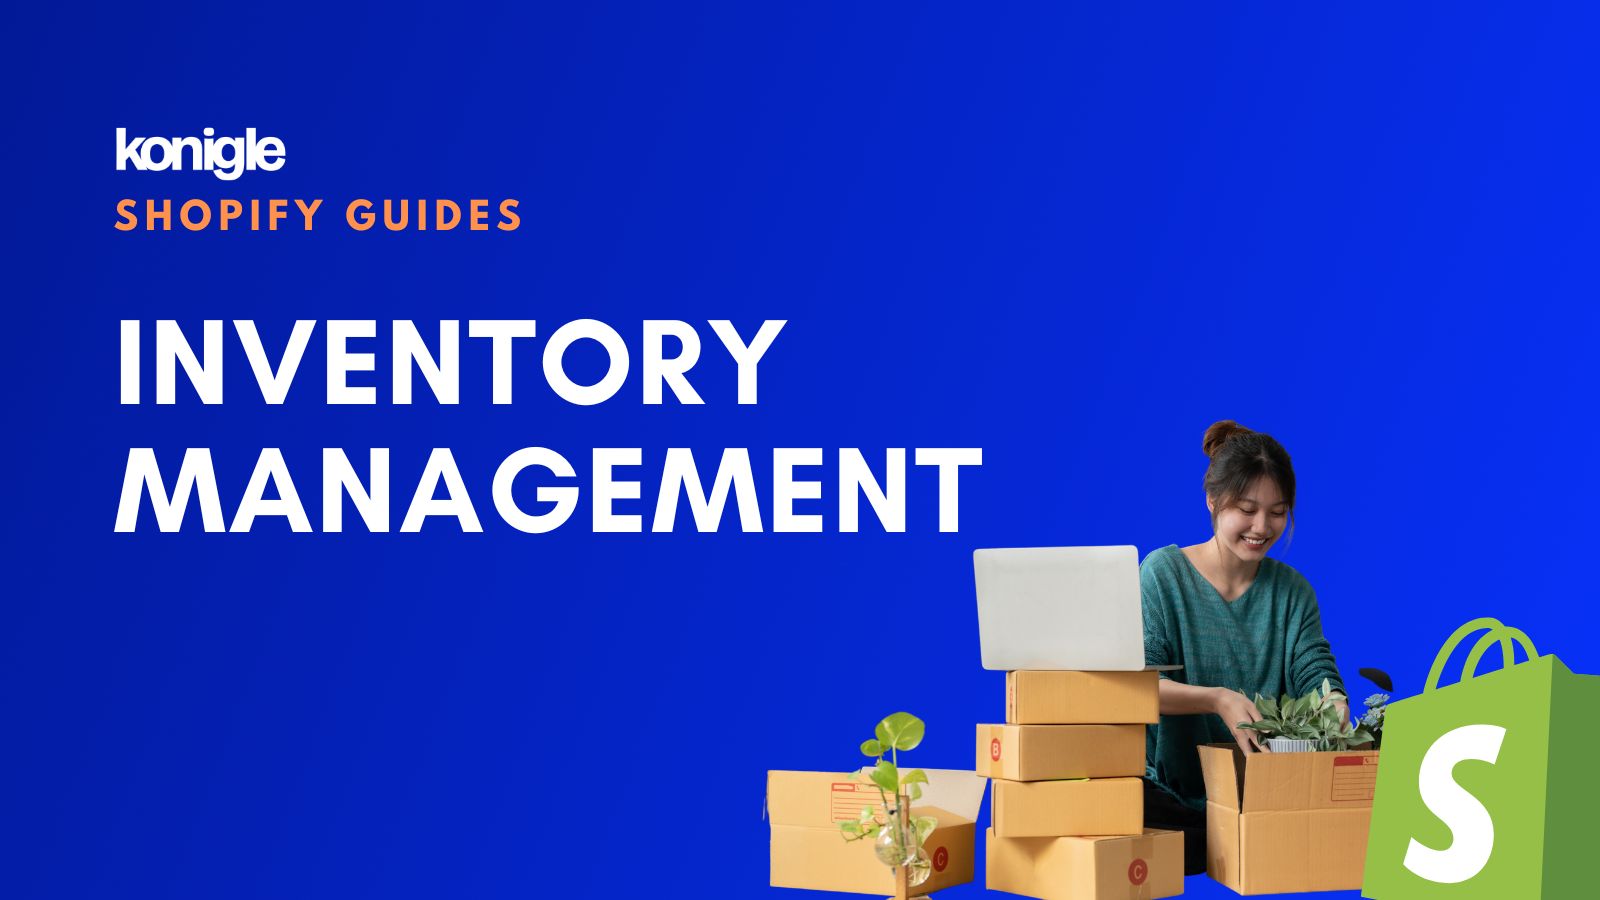 Best shopify inventory management in 2023